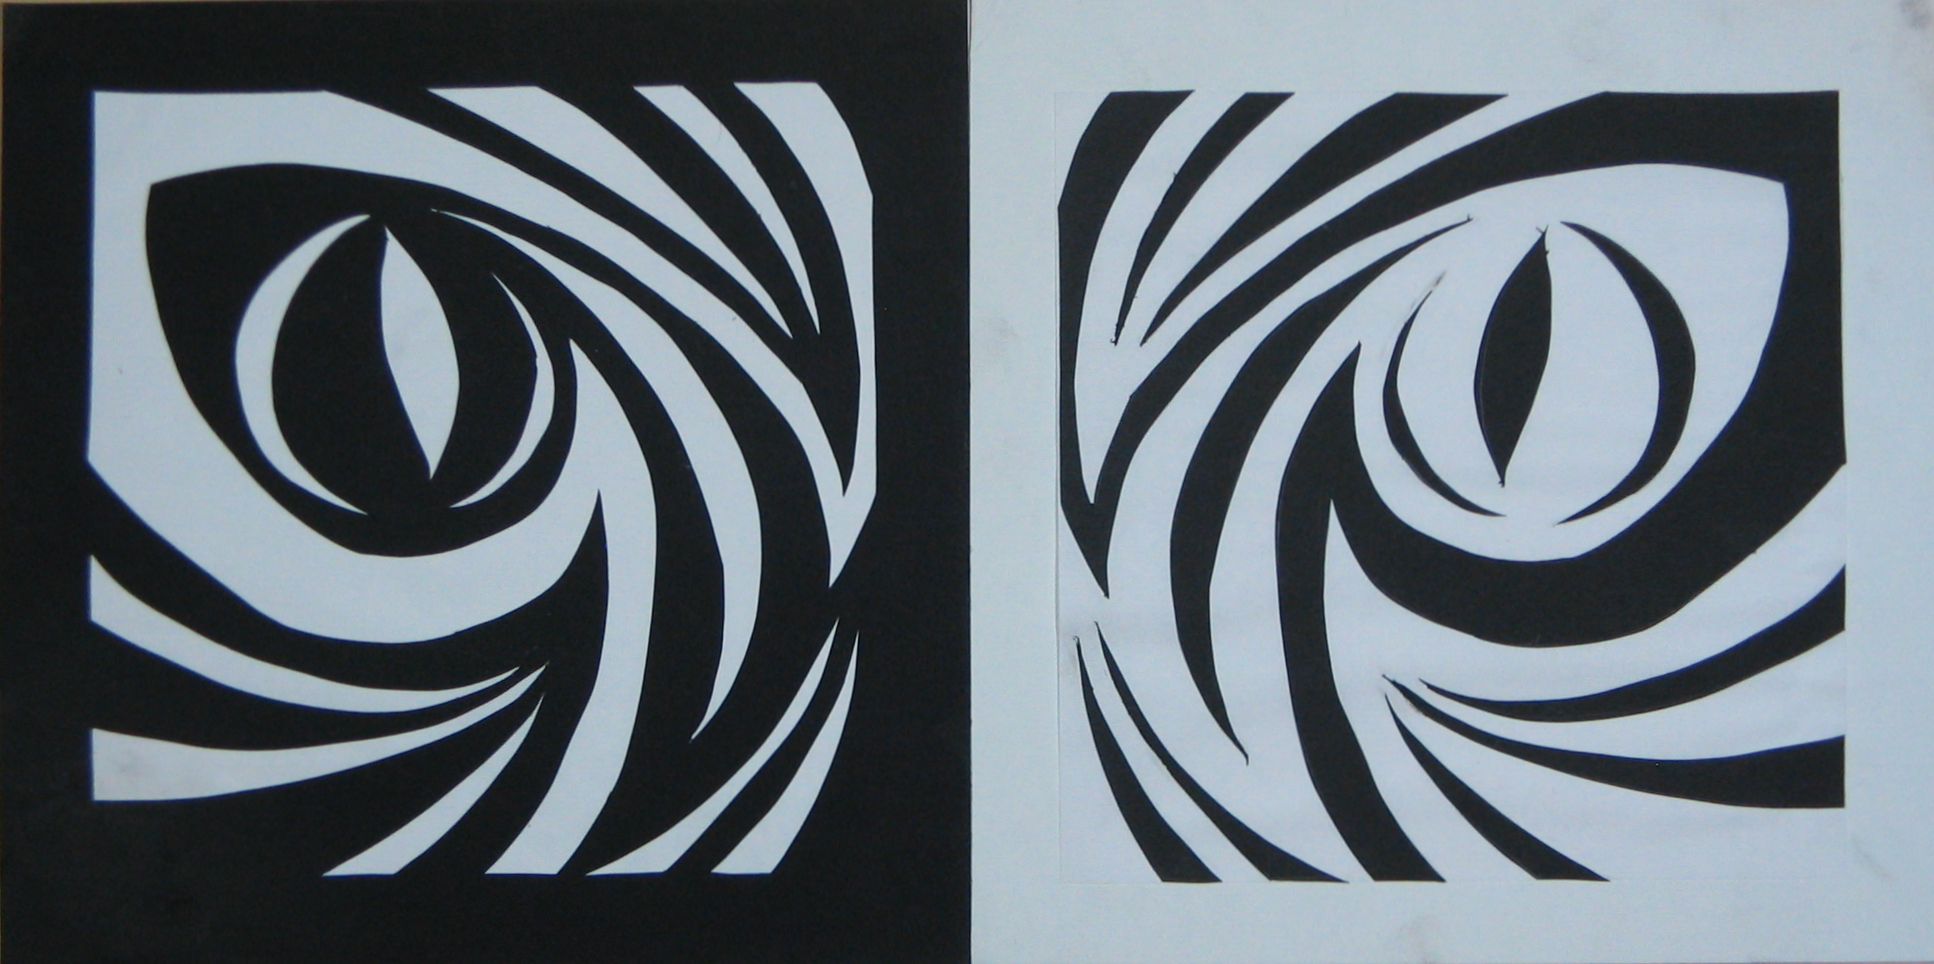 Swirling eye shapes, left side is white on black and right side is black on white